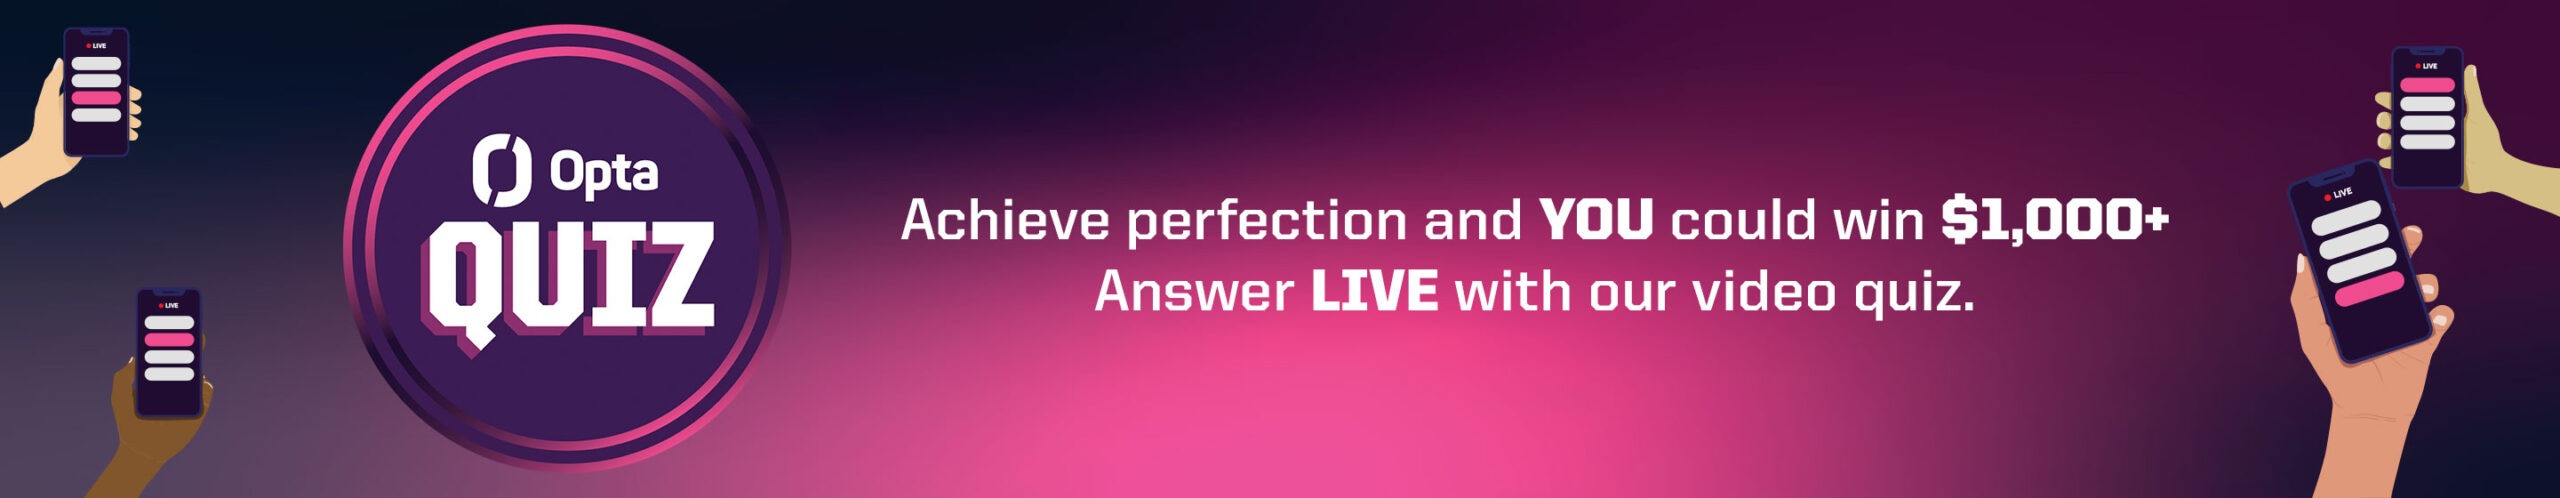 Join our LIVE video quiz at 1830 GMT today for your chance to win $3,000